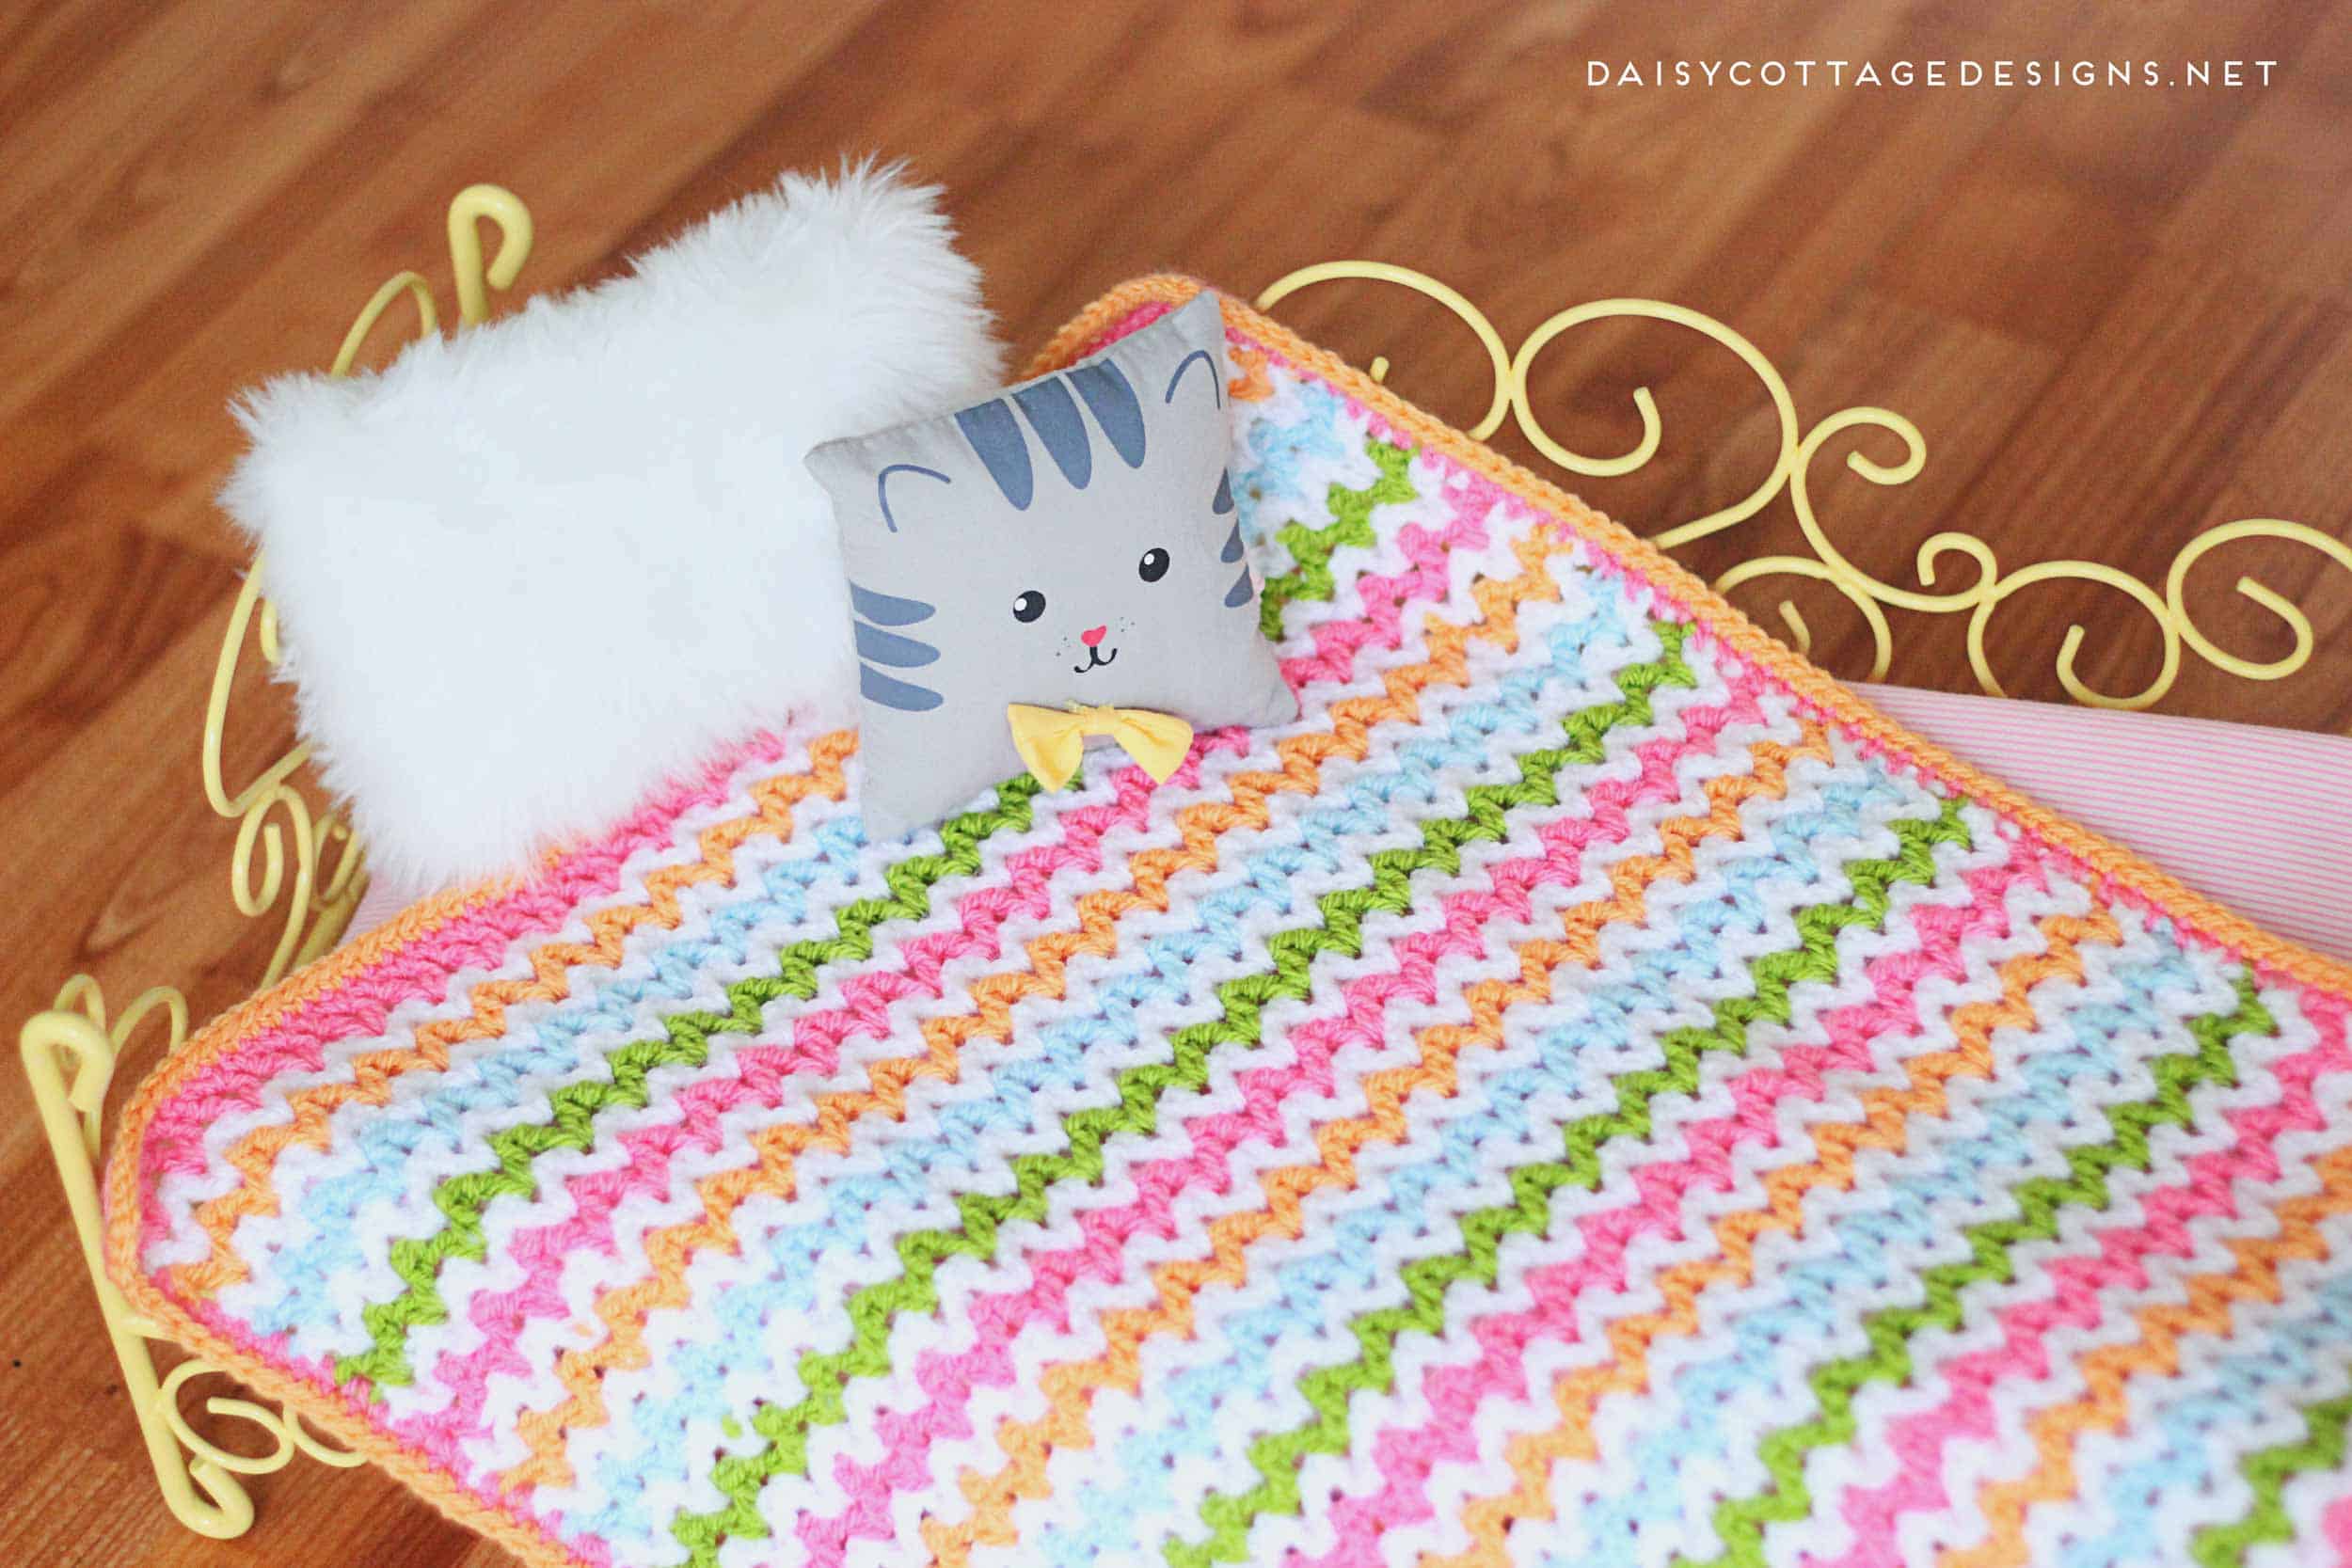 Use this adorable v stitch crochet pattern to create this crochet baby blanket in any size you wish. Free crochet pattern from Daisy Cottage Designs. | baby blanket crochet pattern, easy crochet patter, free crochet pattern, rainbow blanket crochet pattern 